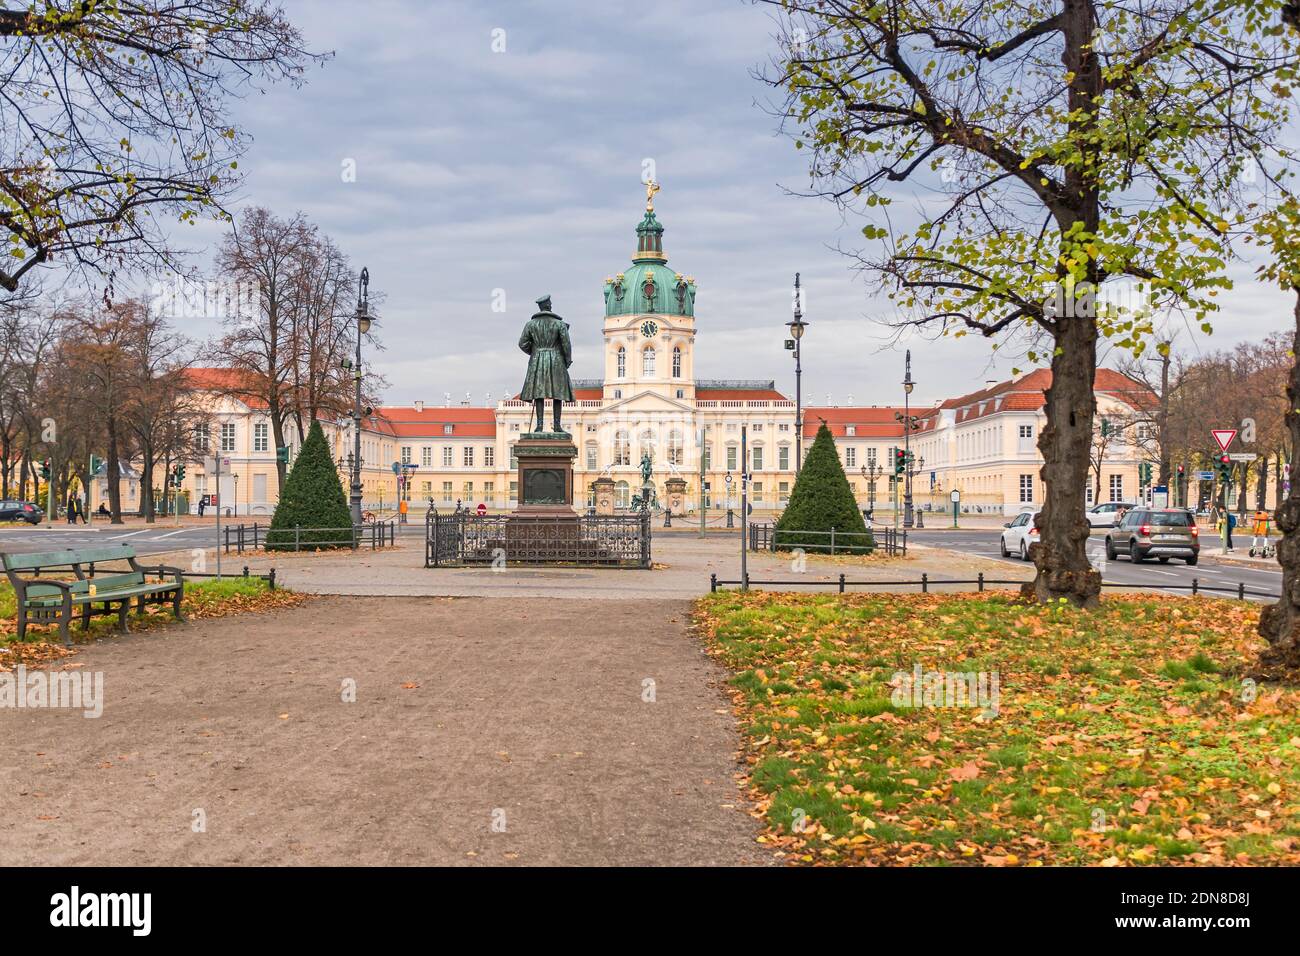 Berlin, Germany - November 13, 2020: Charlottenburg Palace, a former summer residence of the Hohenzollern, monument to Albrecht of Prussia, the brothe Stock Photo